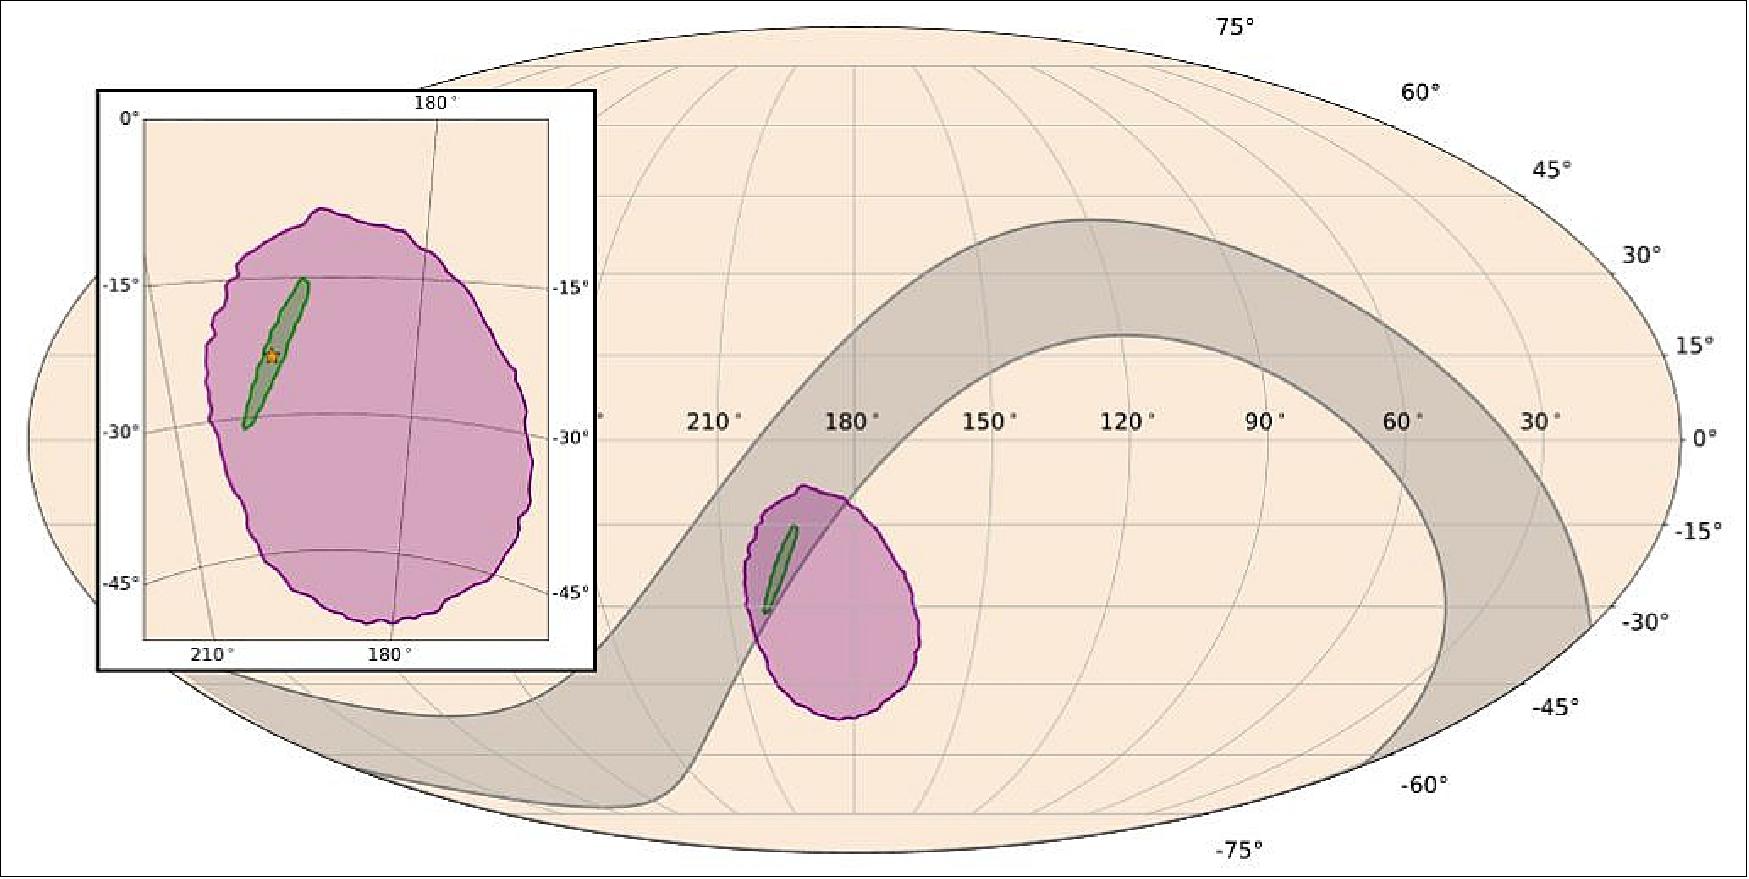 Figure 33: The skymap created by LIGO-Virgo (green) showing the possible location of the source of gravitational waves, compared with regions containing the location of the gamma ray burst source from Fermi (purple) and INTEGRAL (grey). The inset shows the actual position of the galaxy (orange star) containing the 'optical transient' that resulted from the merger of two neutron stars (image credit: NASA/ESO)